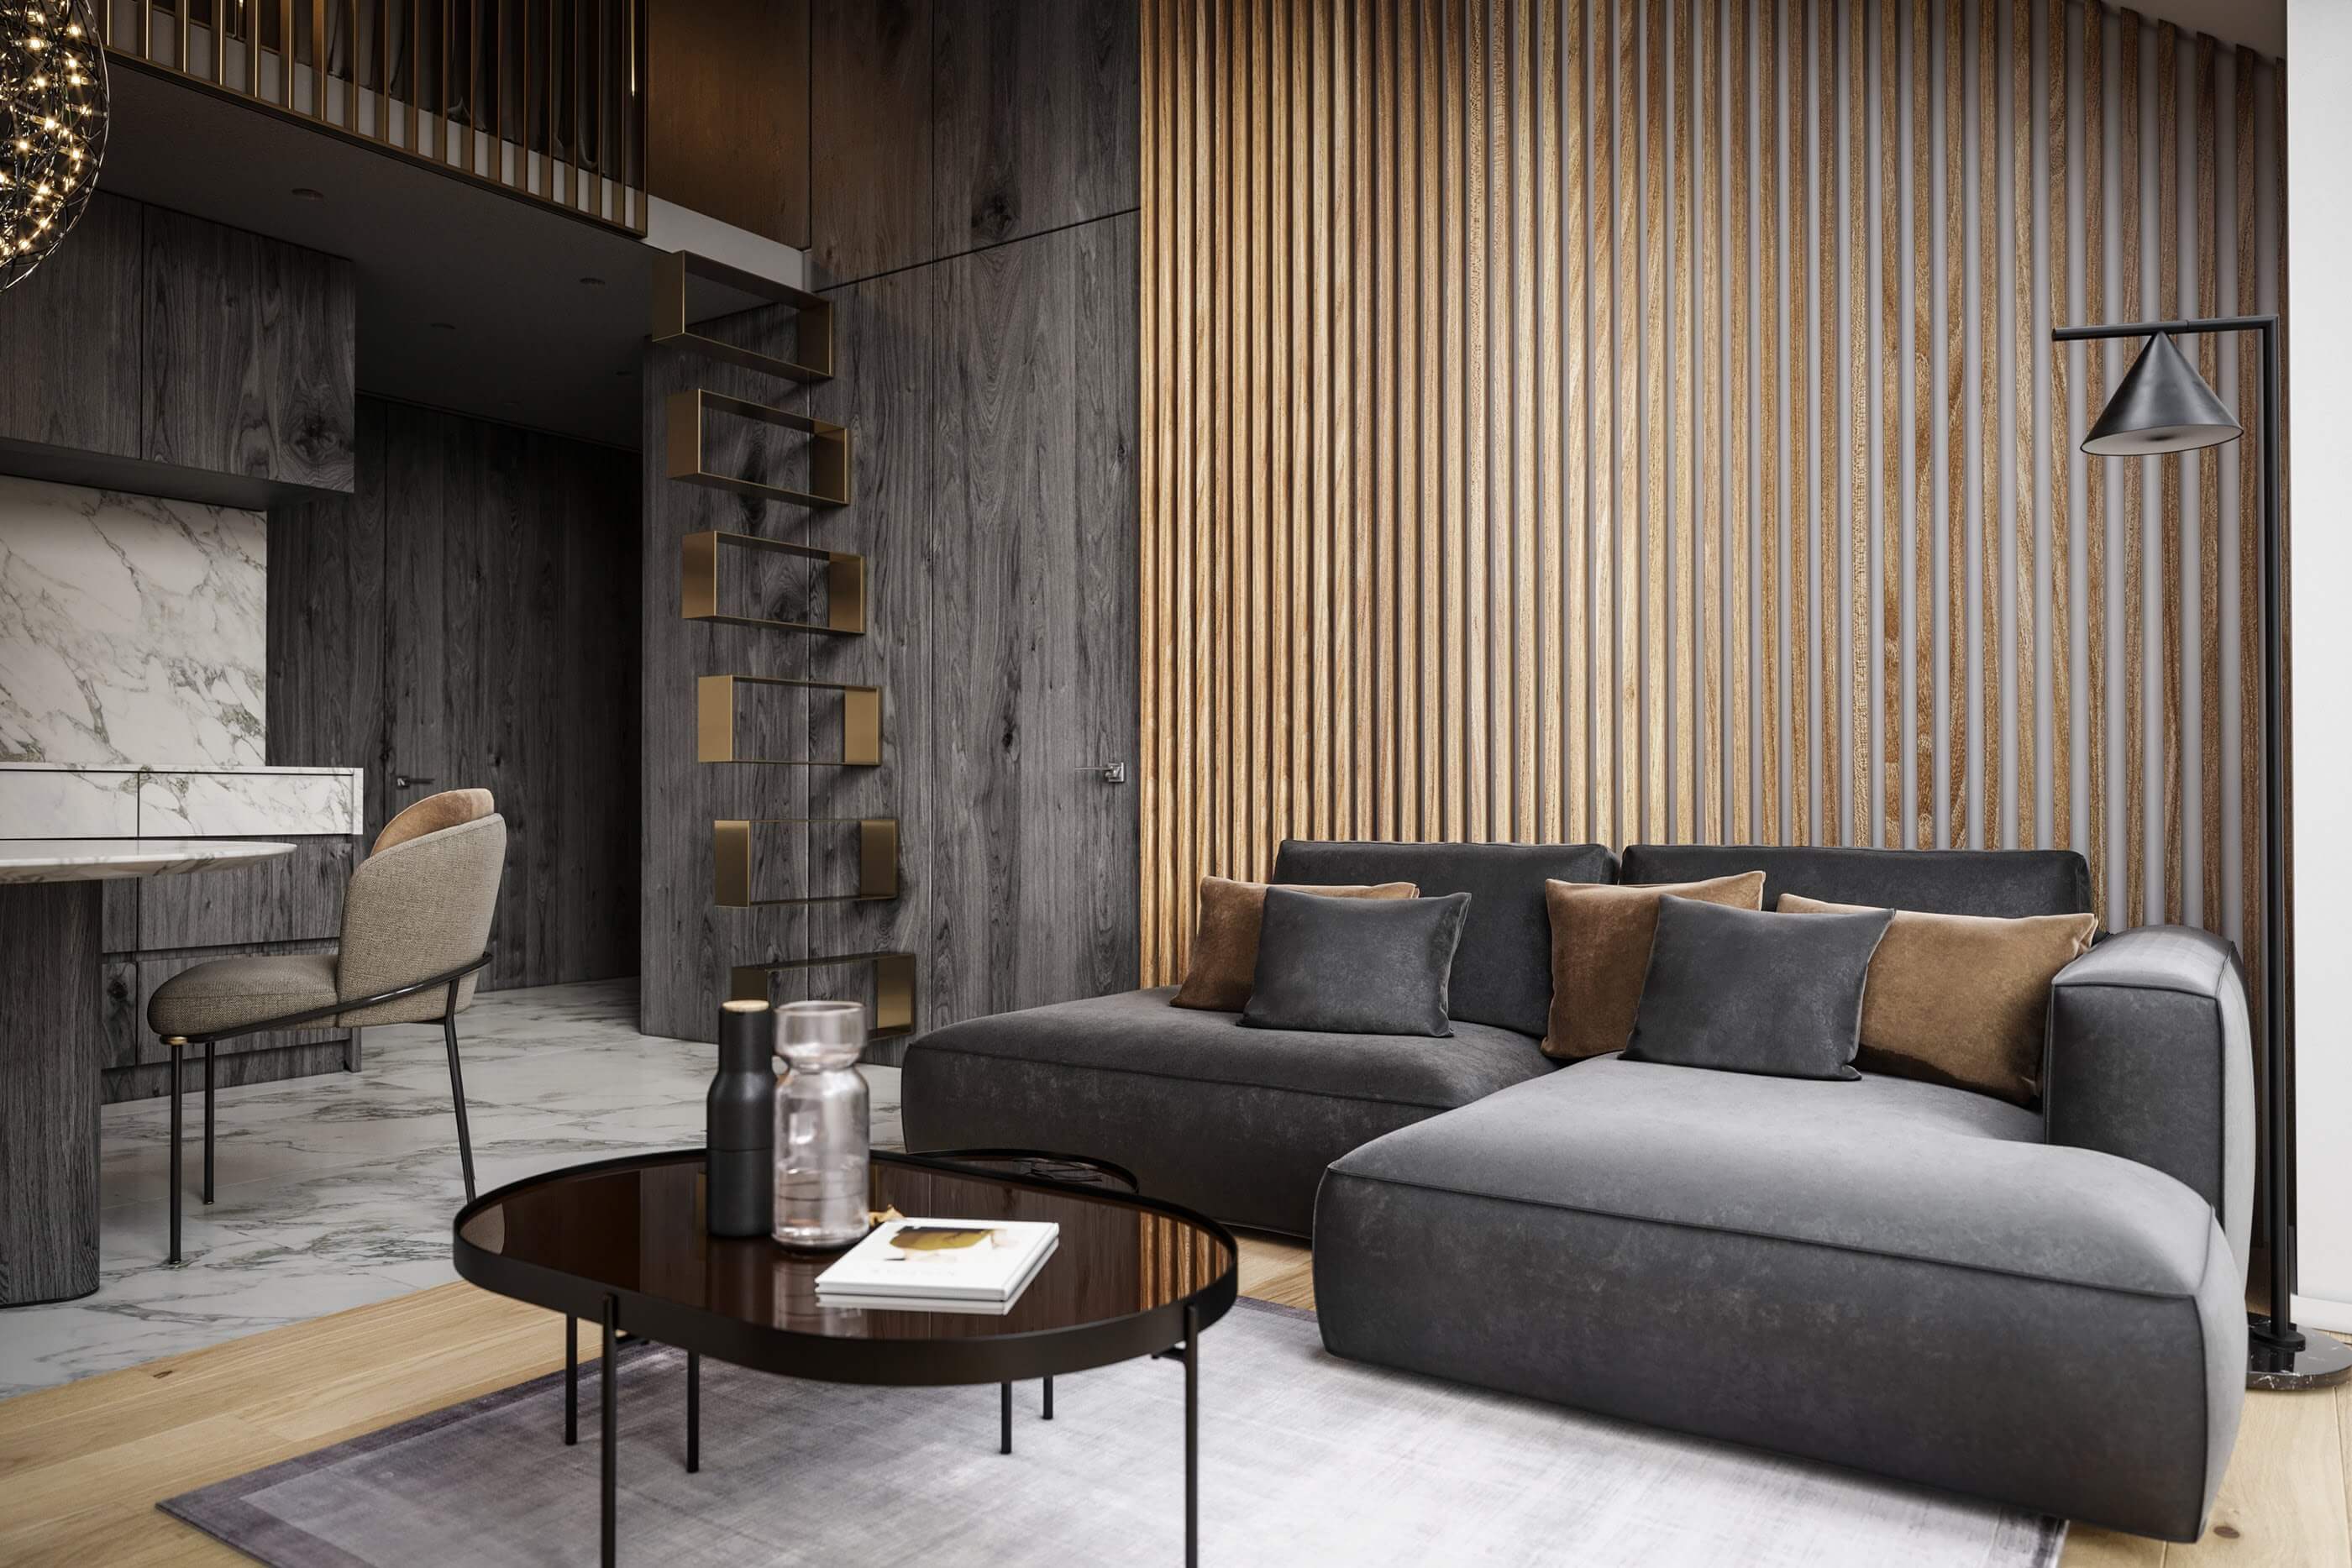 Cozy & modern apartment in the forest living room couch and side table - cgi visualization